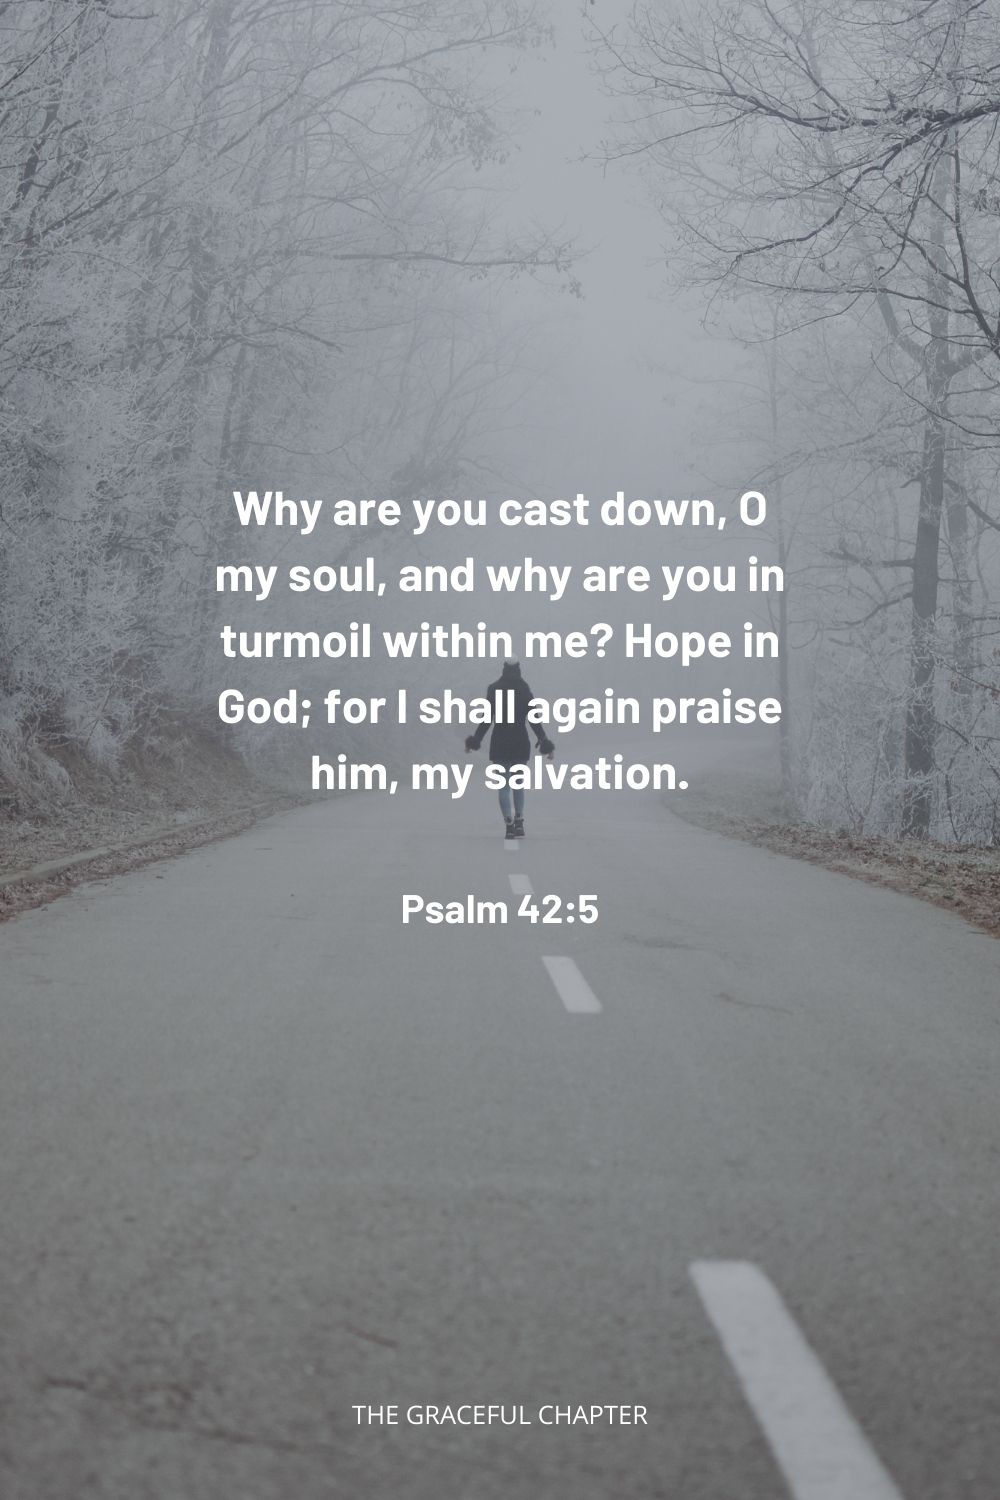 Why are you cast down, O my soul, and why are you in turmoil within me? Hope in God; for I shall again praise him, my salvation. Psalm 42:5